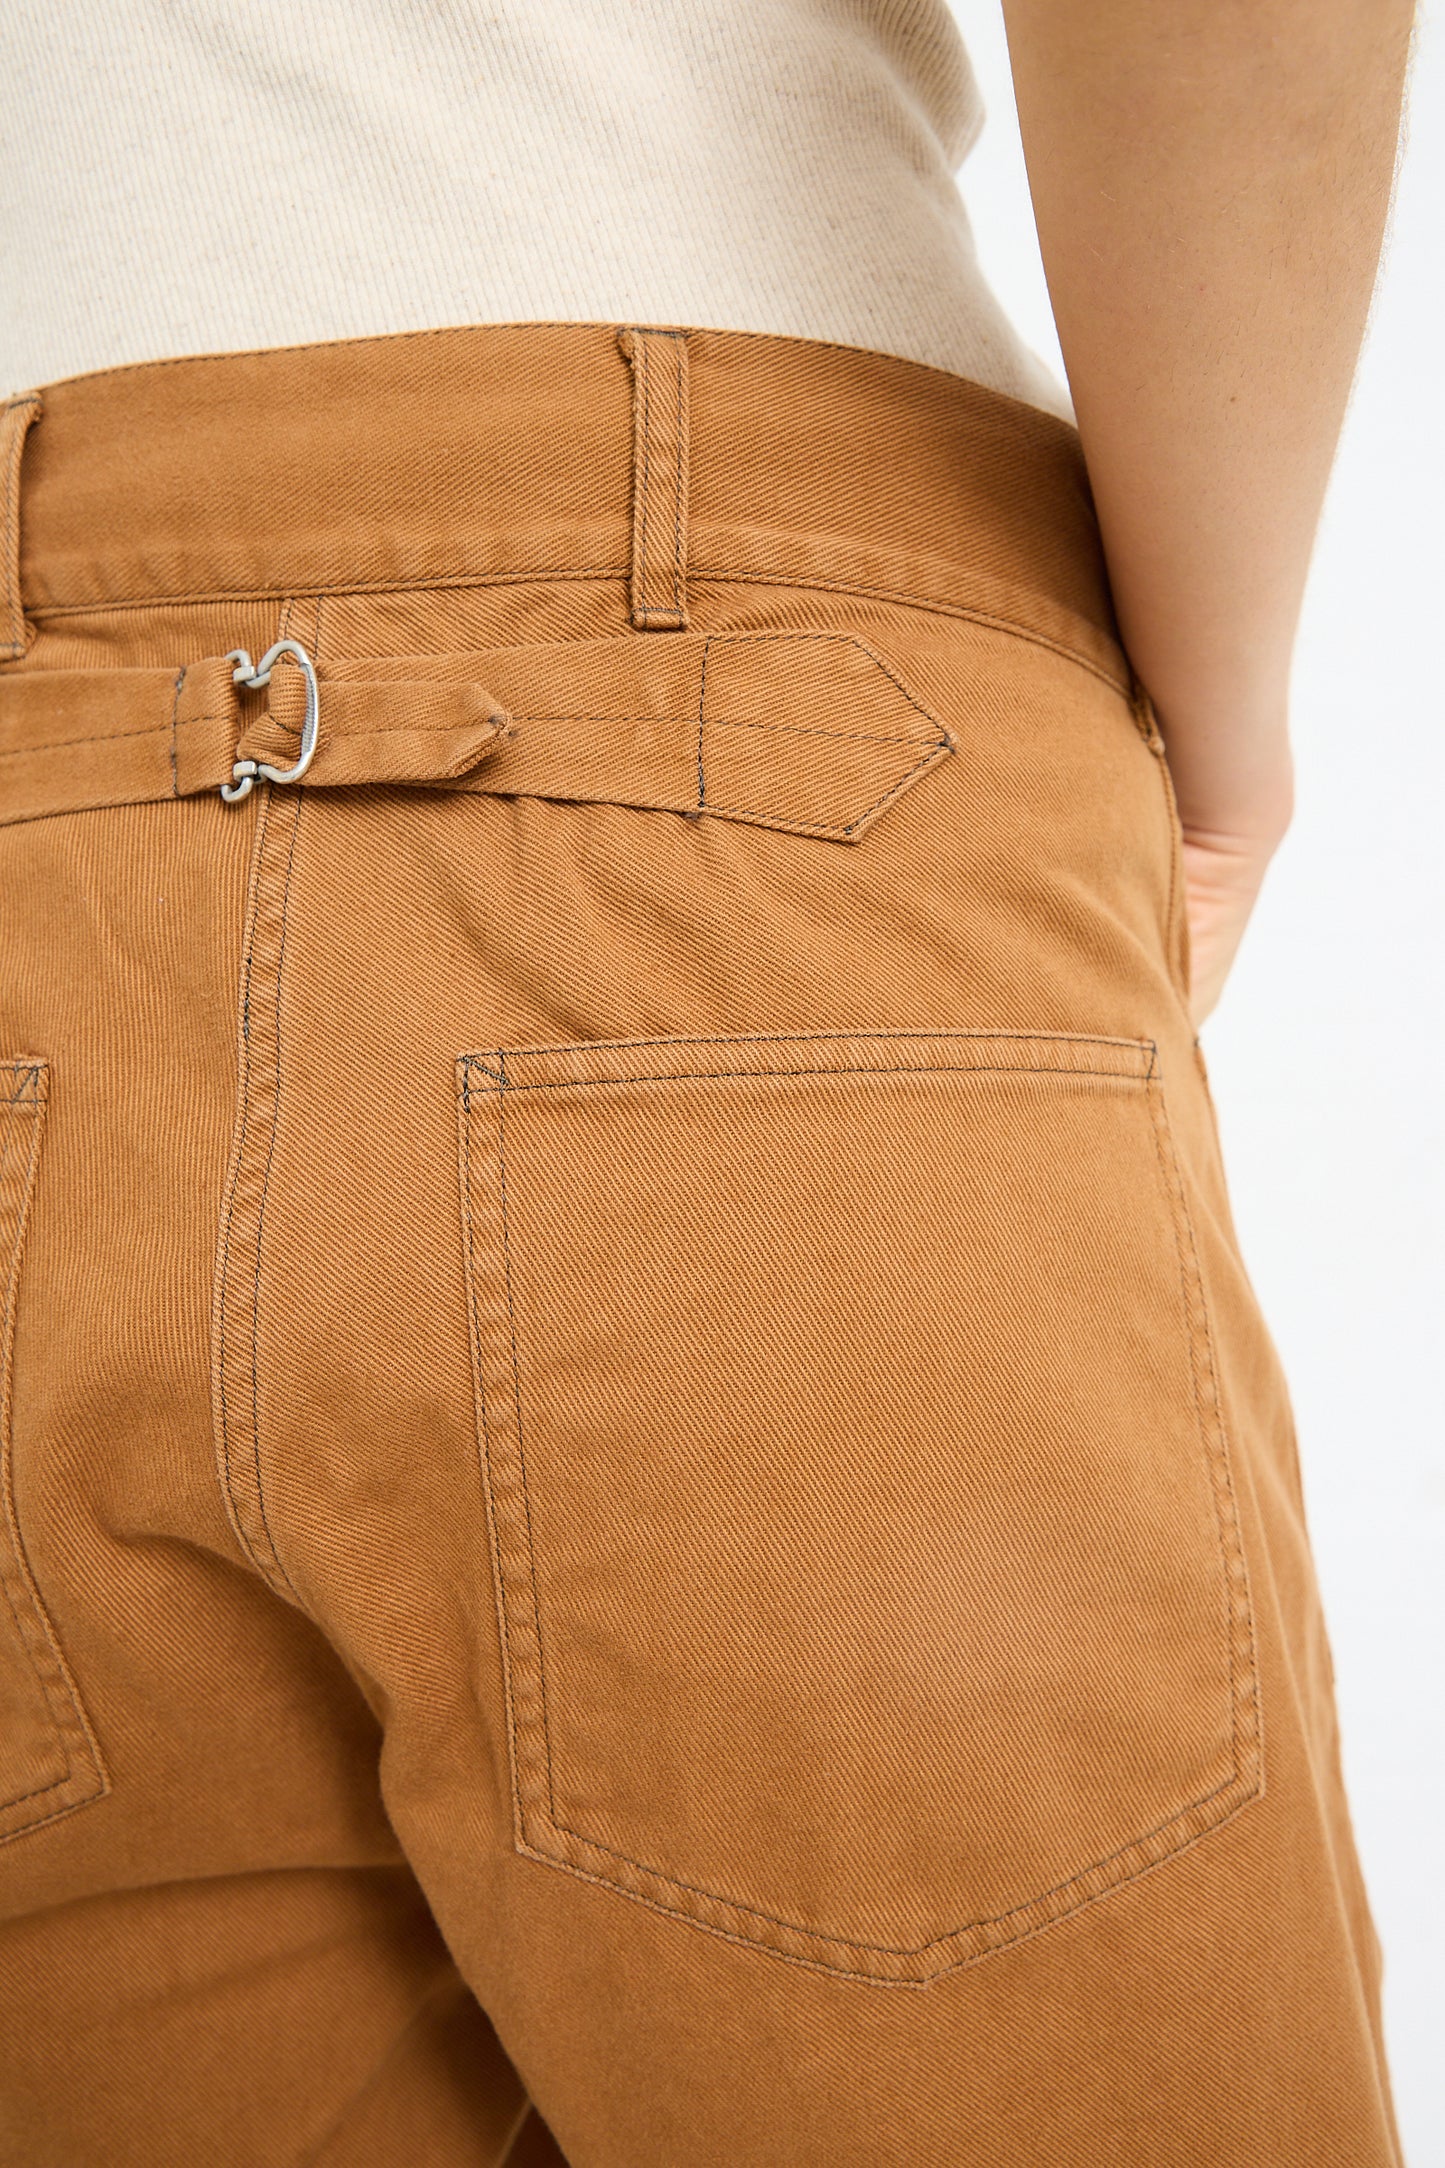 Close-up of the back of a person wearing Chimala Classic Drill US Army Work Trouser in Camel with a belt loop tie detail, crafted from Japanese cotton canvas.